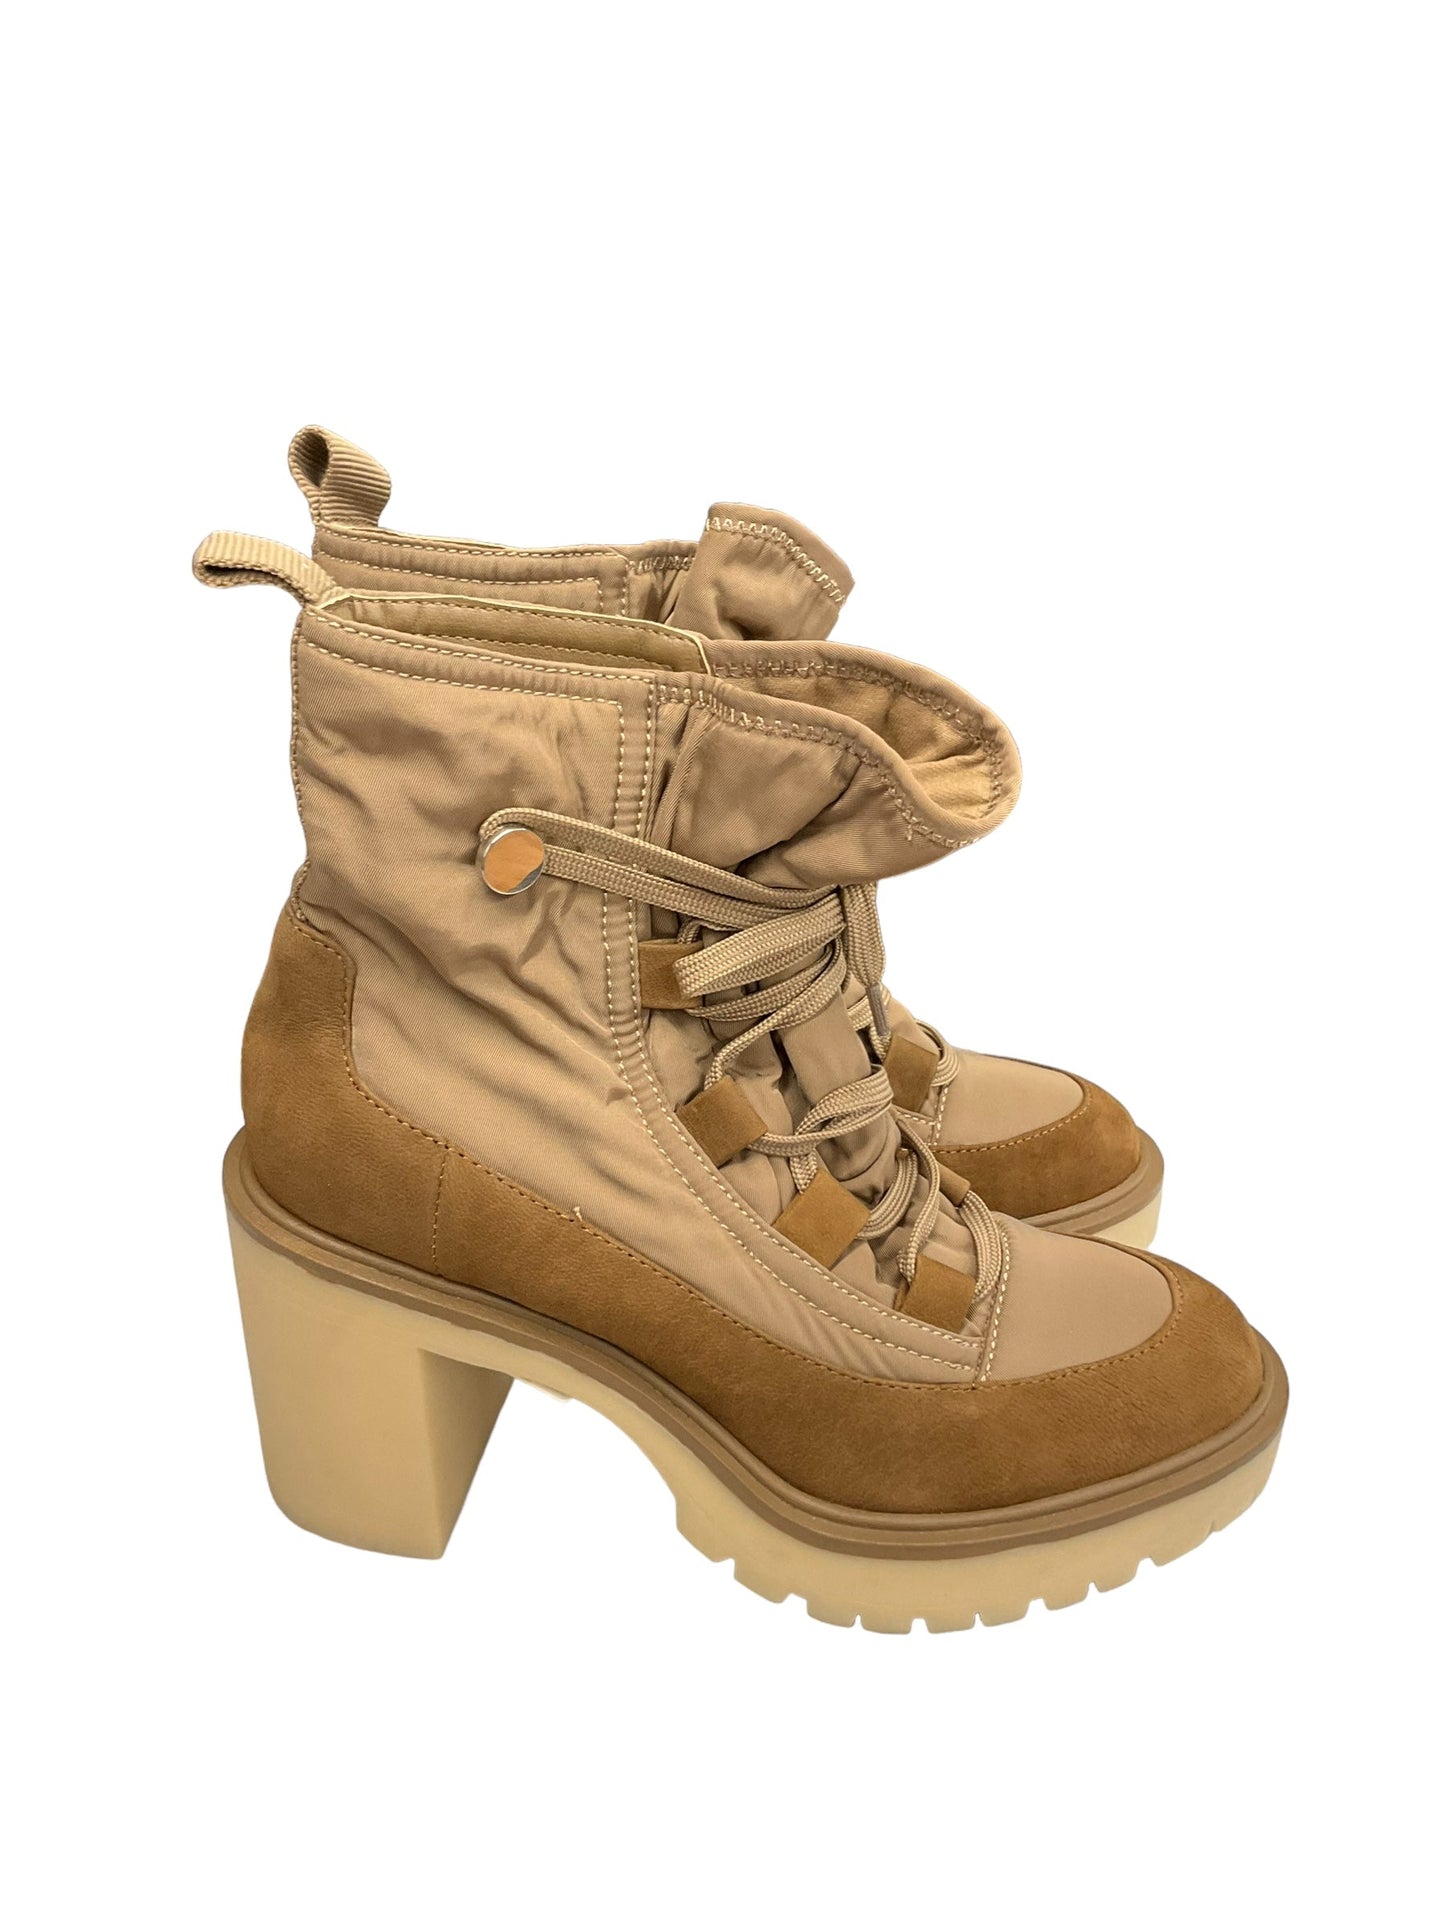 Tan Boots Ankle Heels Dolce Vita, Size 8